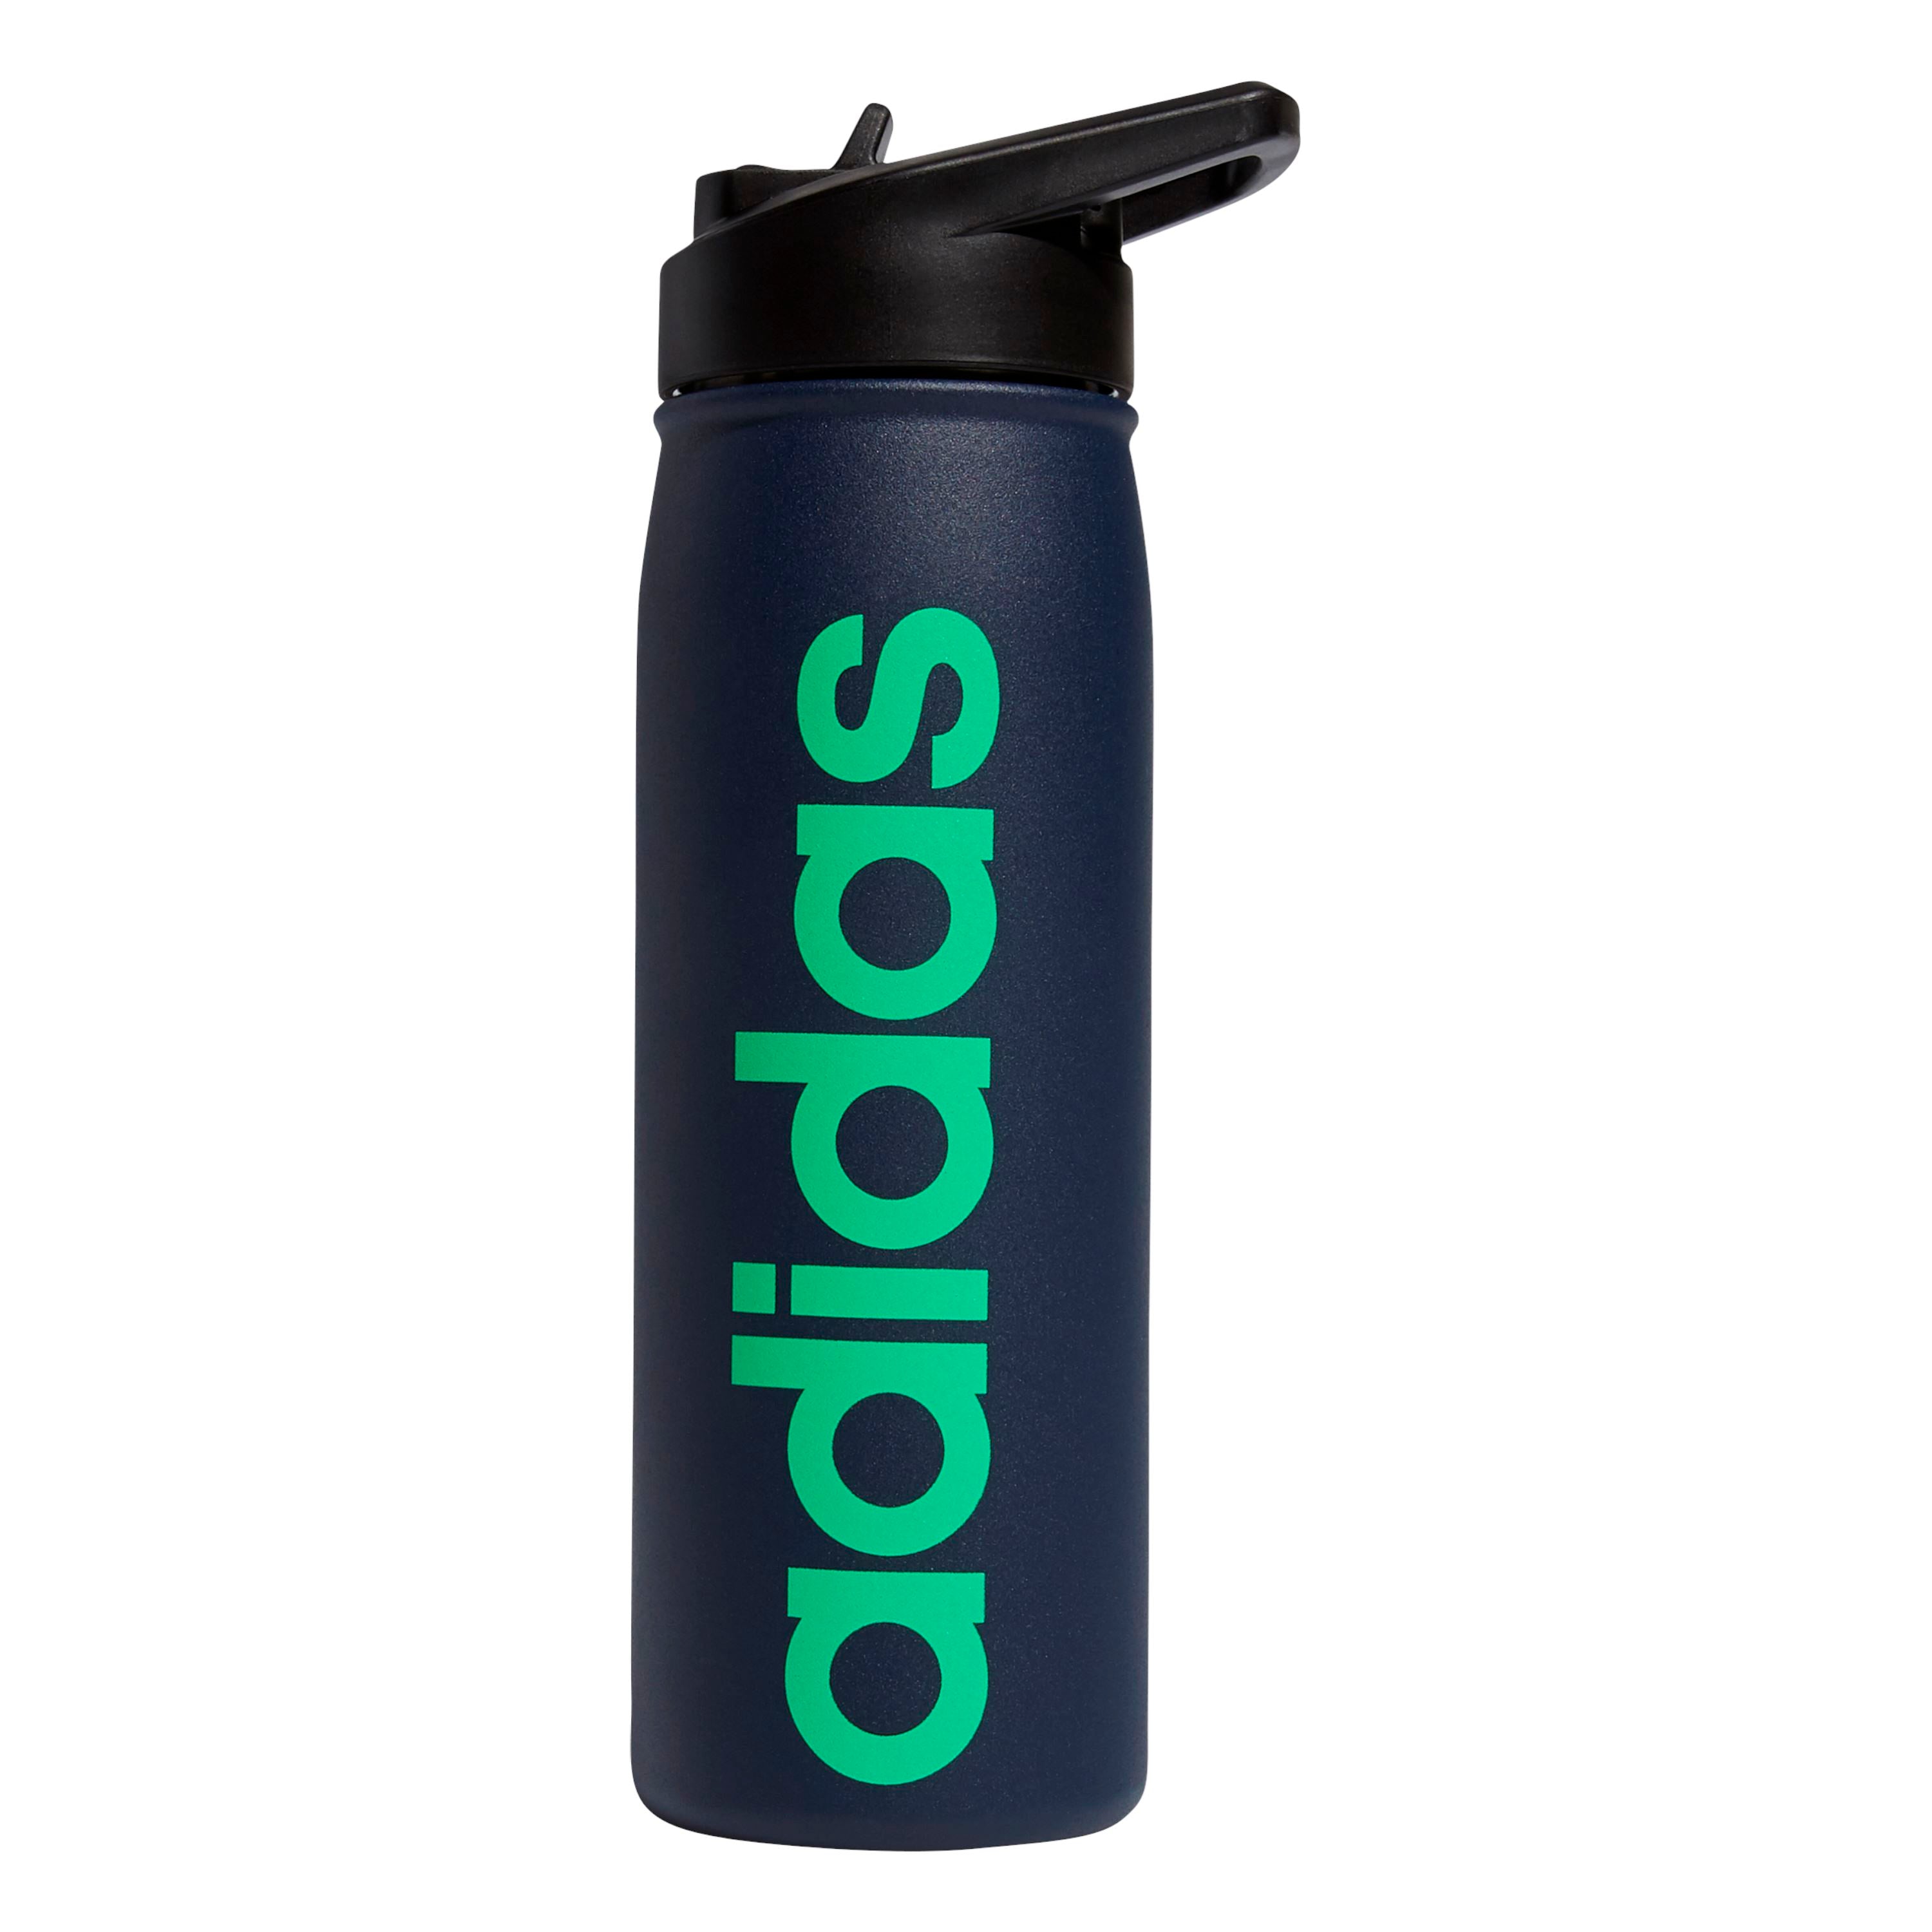 Brand New! Adidas Stainless Steel 1L Water Bottle!